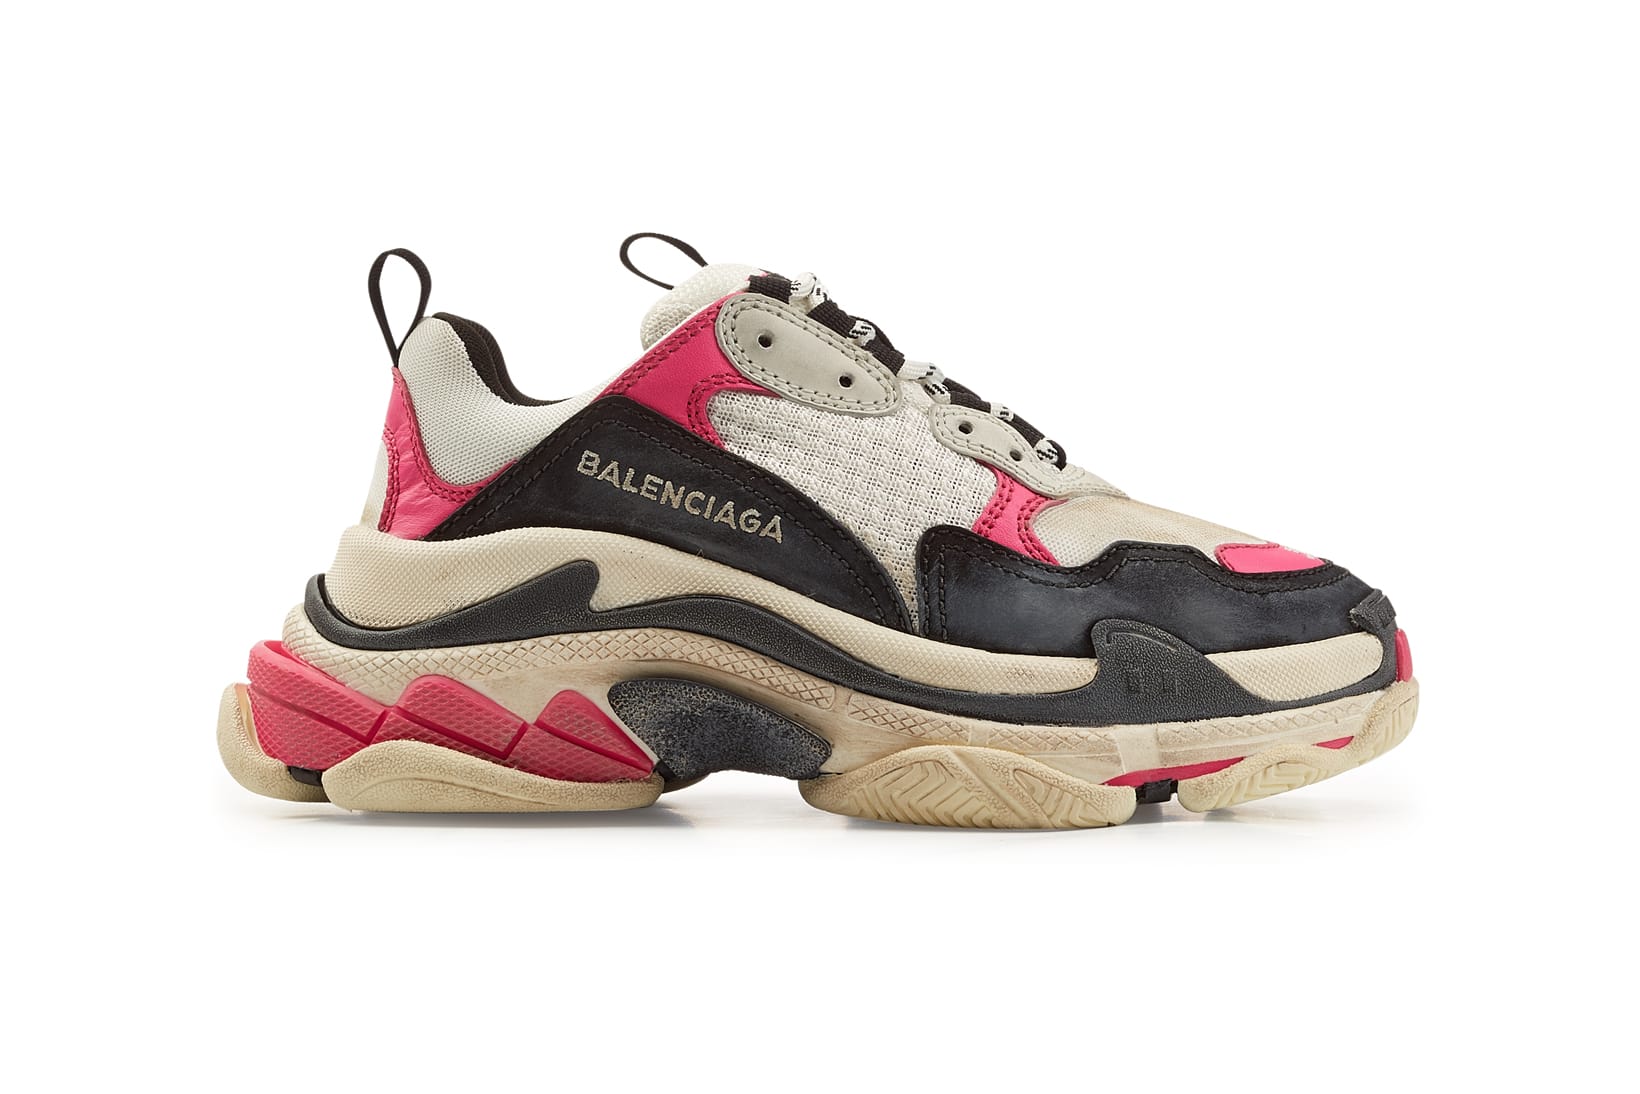 Balenciaga Triple S Sneakers Products in 2019 Sneakers